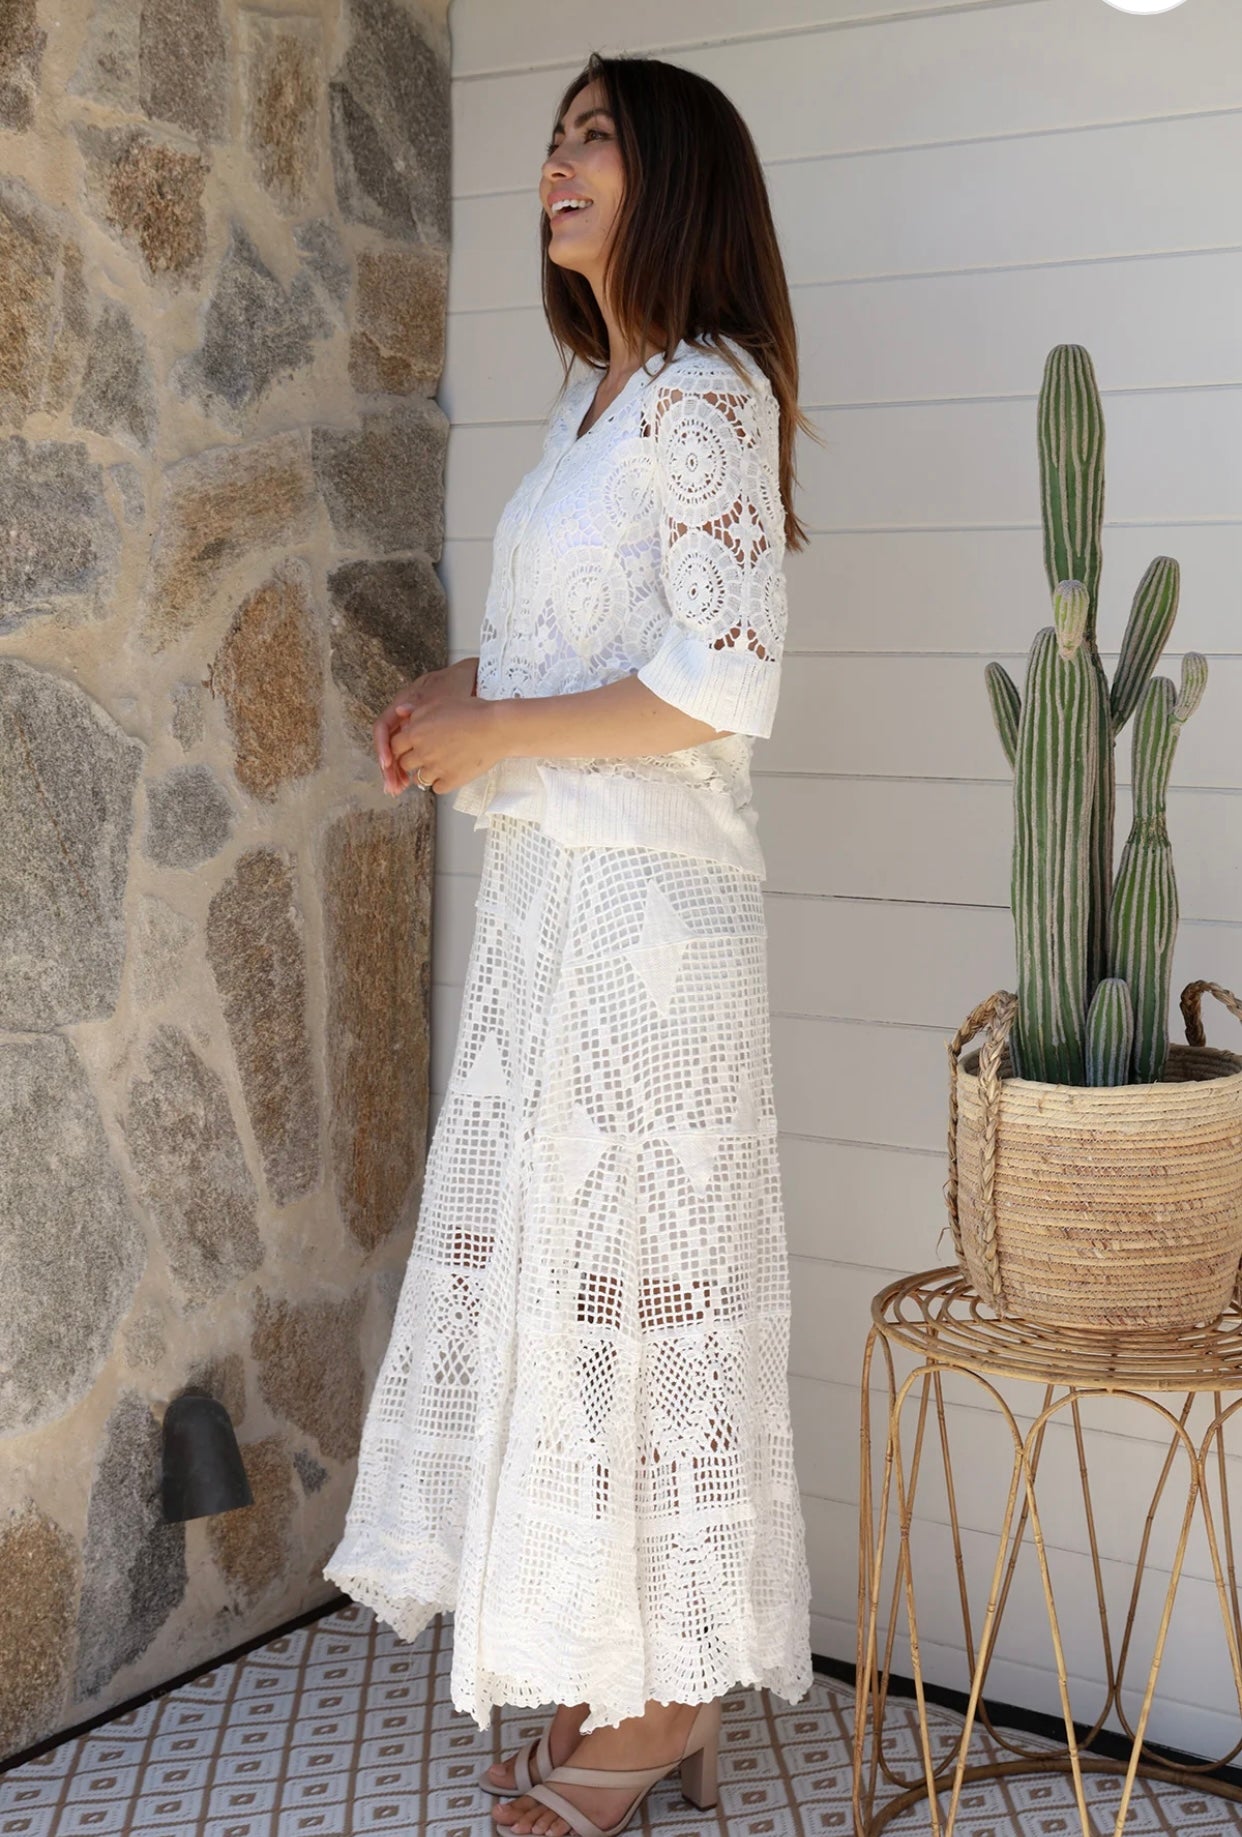 Lilly Design Maxi Skirt white crochet lace cotton